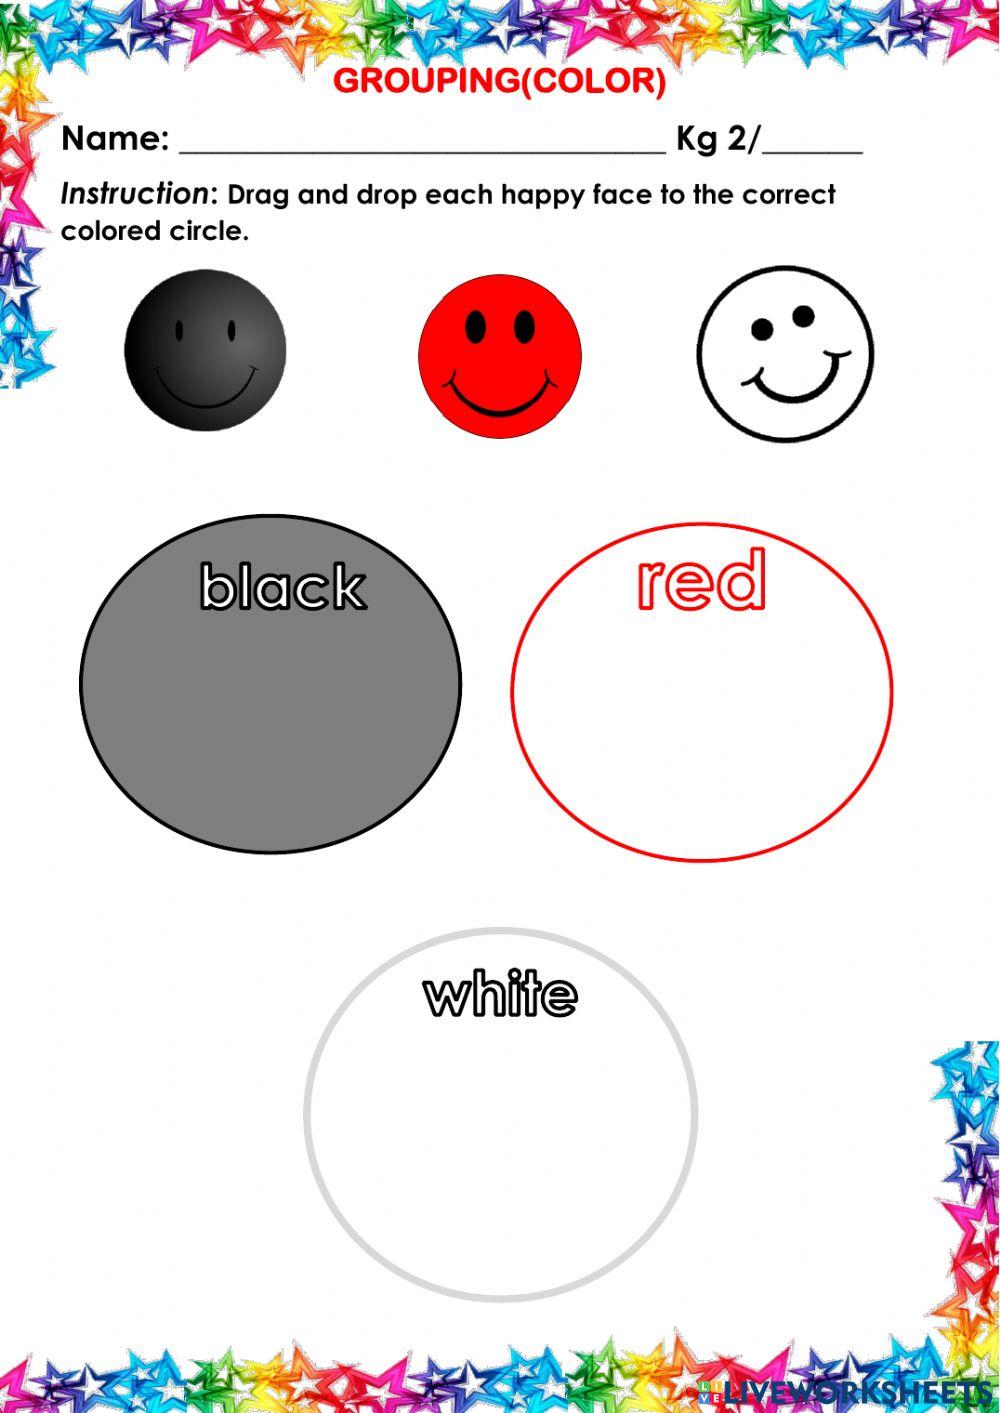 Grouping(color)